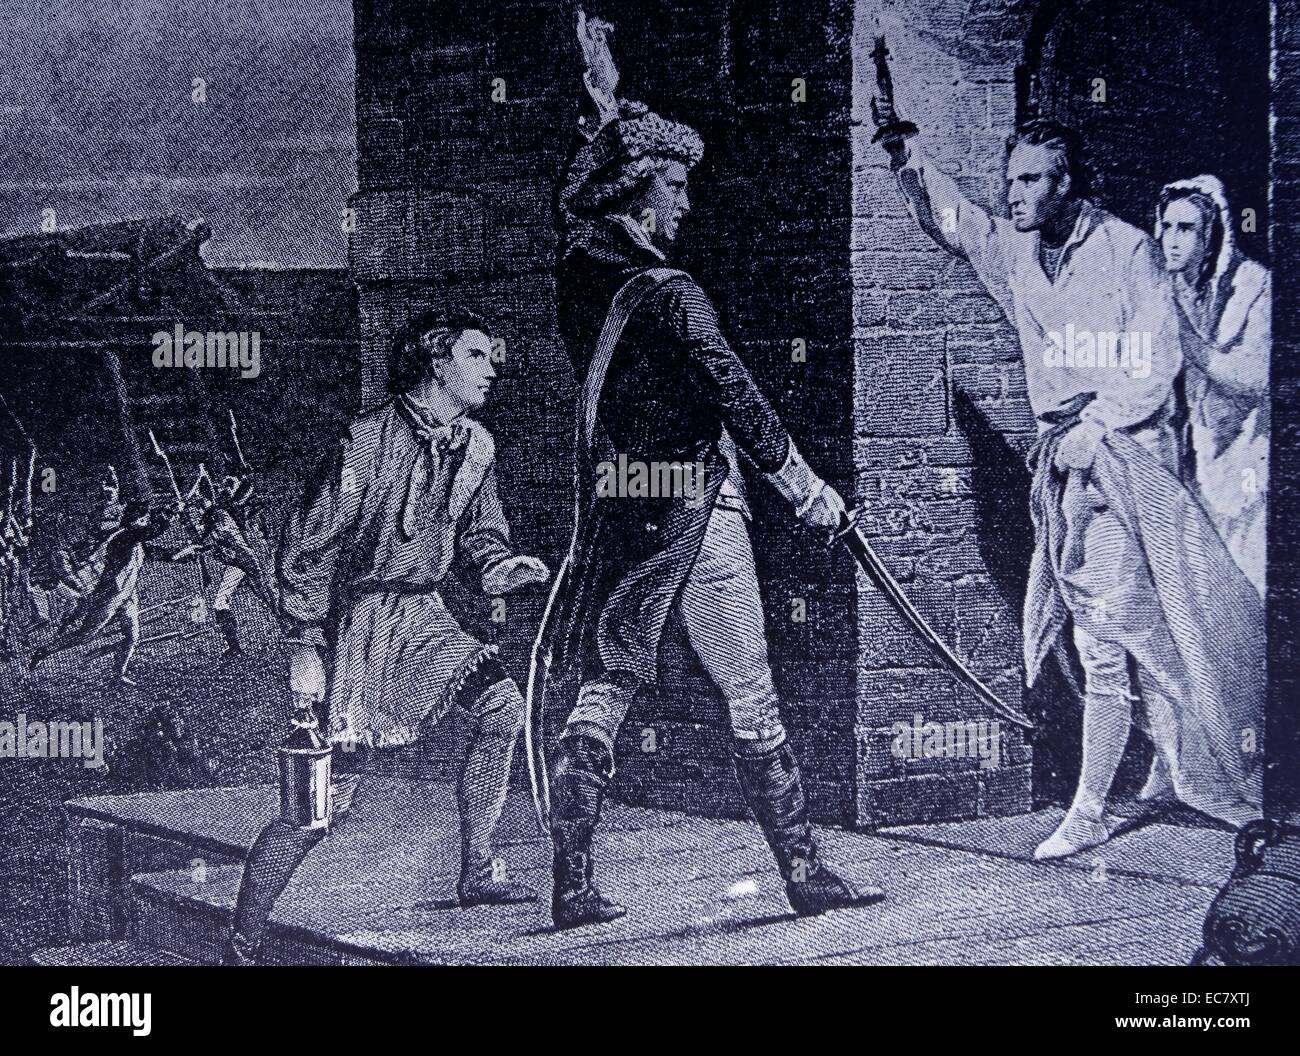 The Capture of Fort Ticonderoga occurred during the American Revolutionary War on May 10, 1775, when a small force of Green Mountain Boys led by Ethan Allen and Colonel Benedict Arnold overcame a small British garrison at the fort. print showing Ethan Allen demanding the fort's surrender Stock Photo